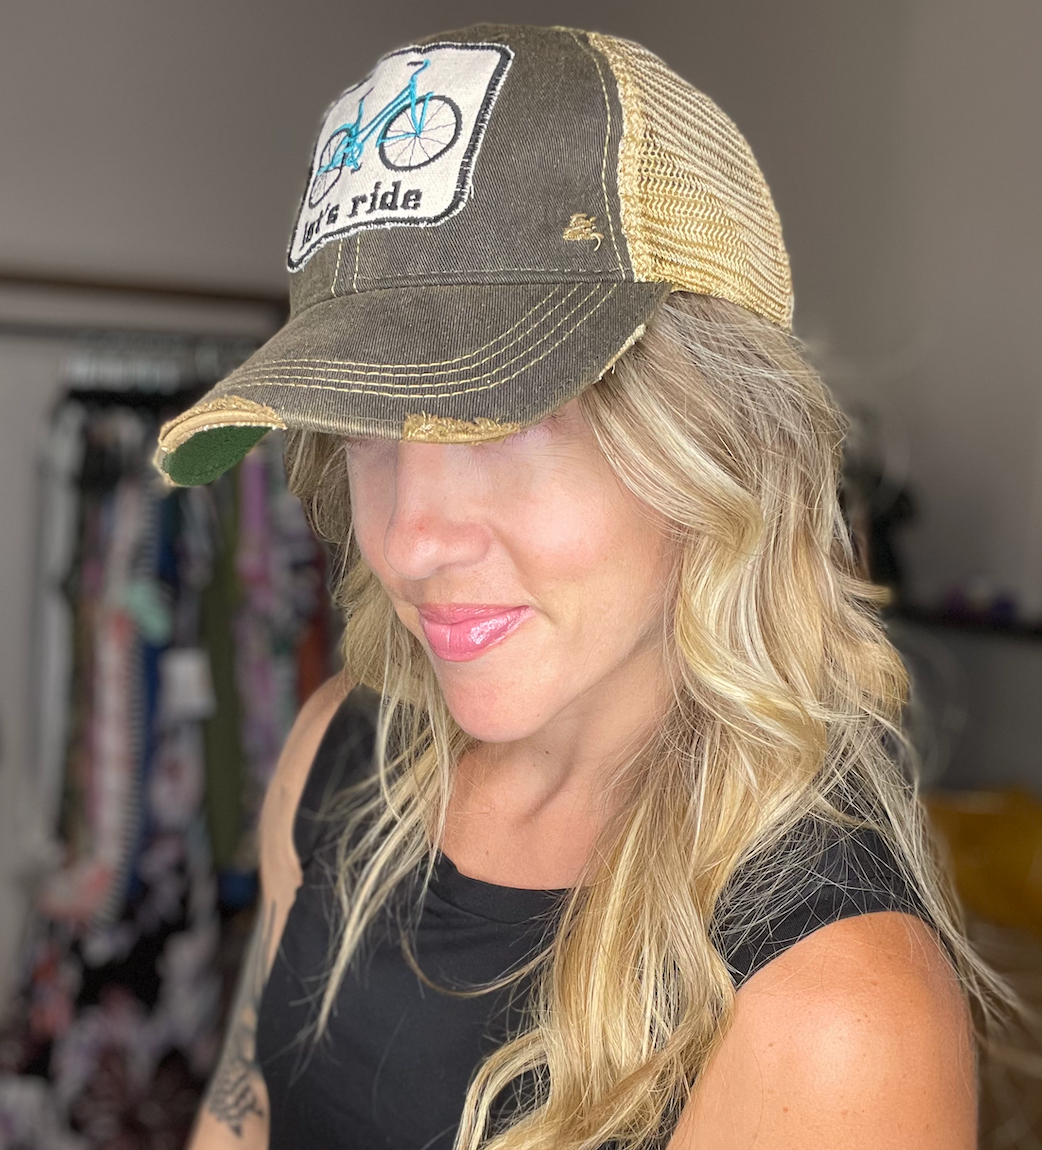 Let's Ride bicycle distressed trucker hat